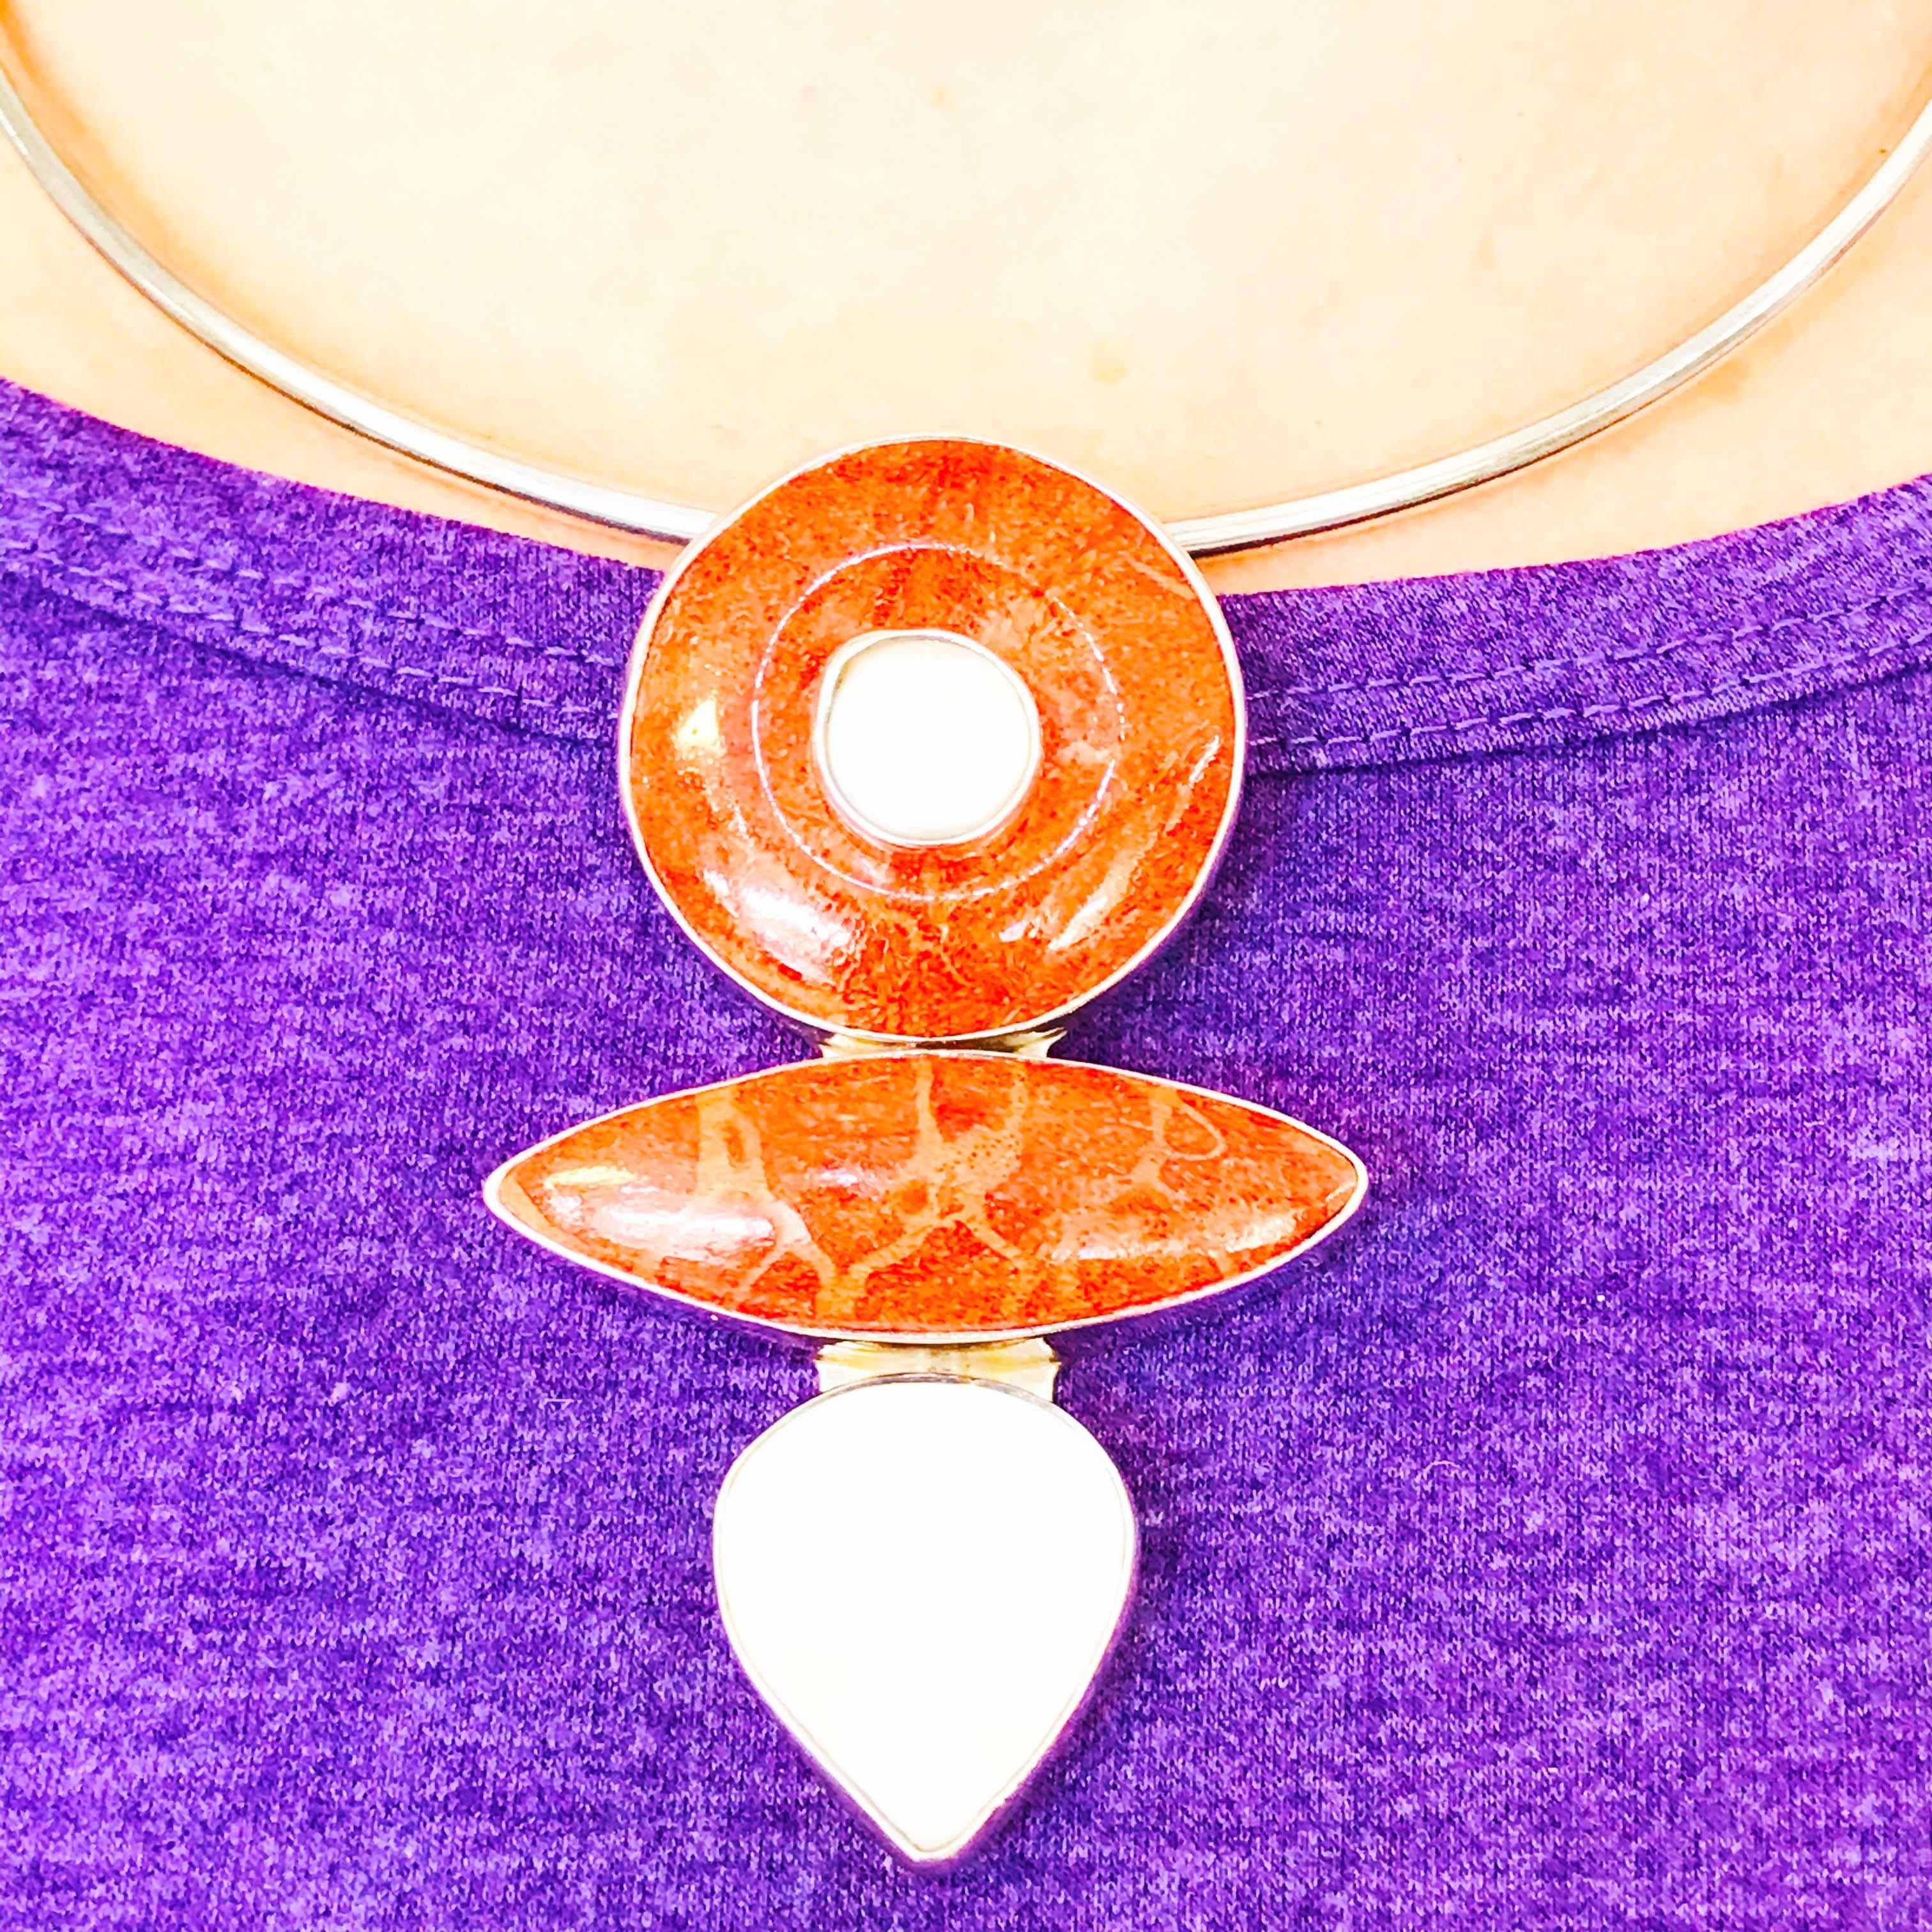 Round Cut Original Arts & Craft Coral and Mother of Pearl Pendant Brooch Necklace, Orange